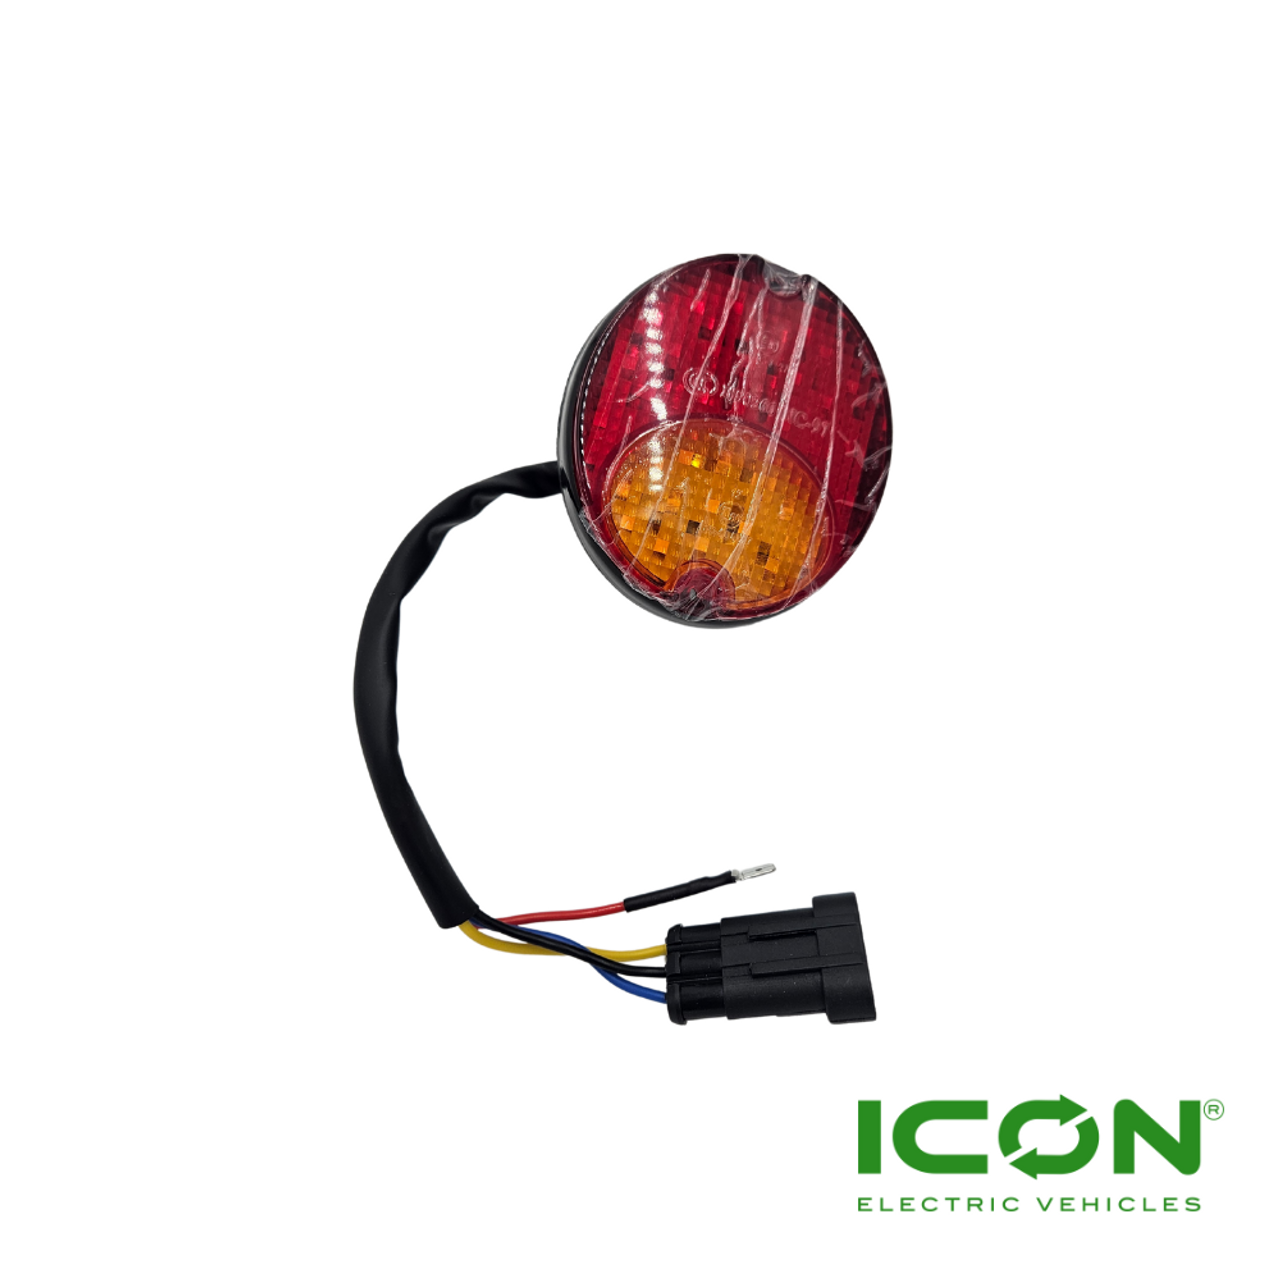 Round Tail Light for ICON Golf Carts, LIGHT-713-IC, 3.03.001.000009